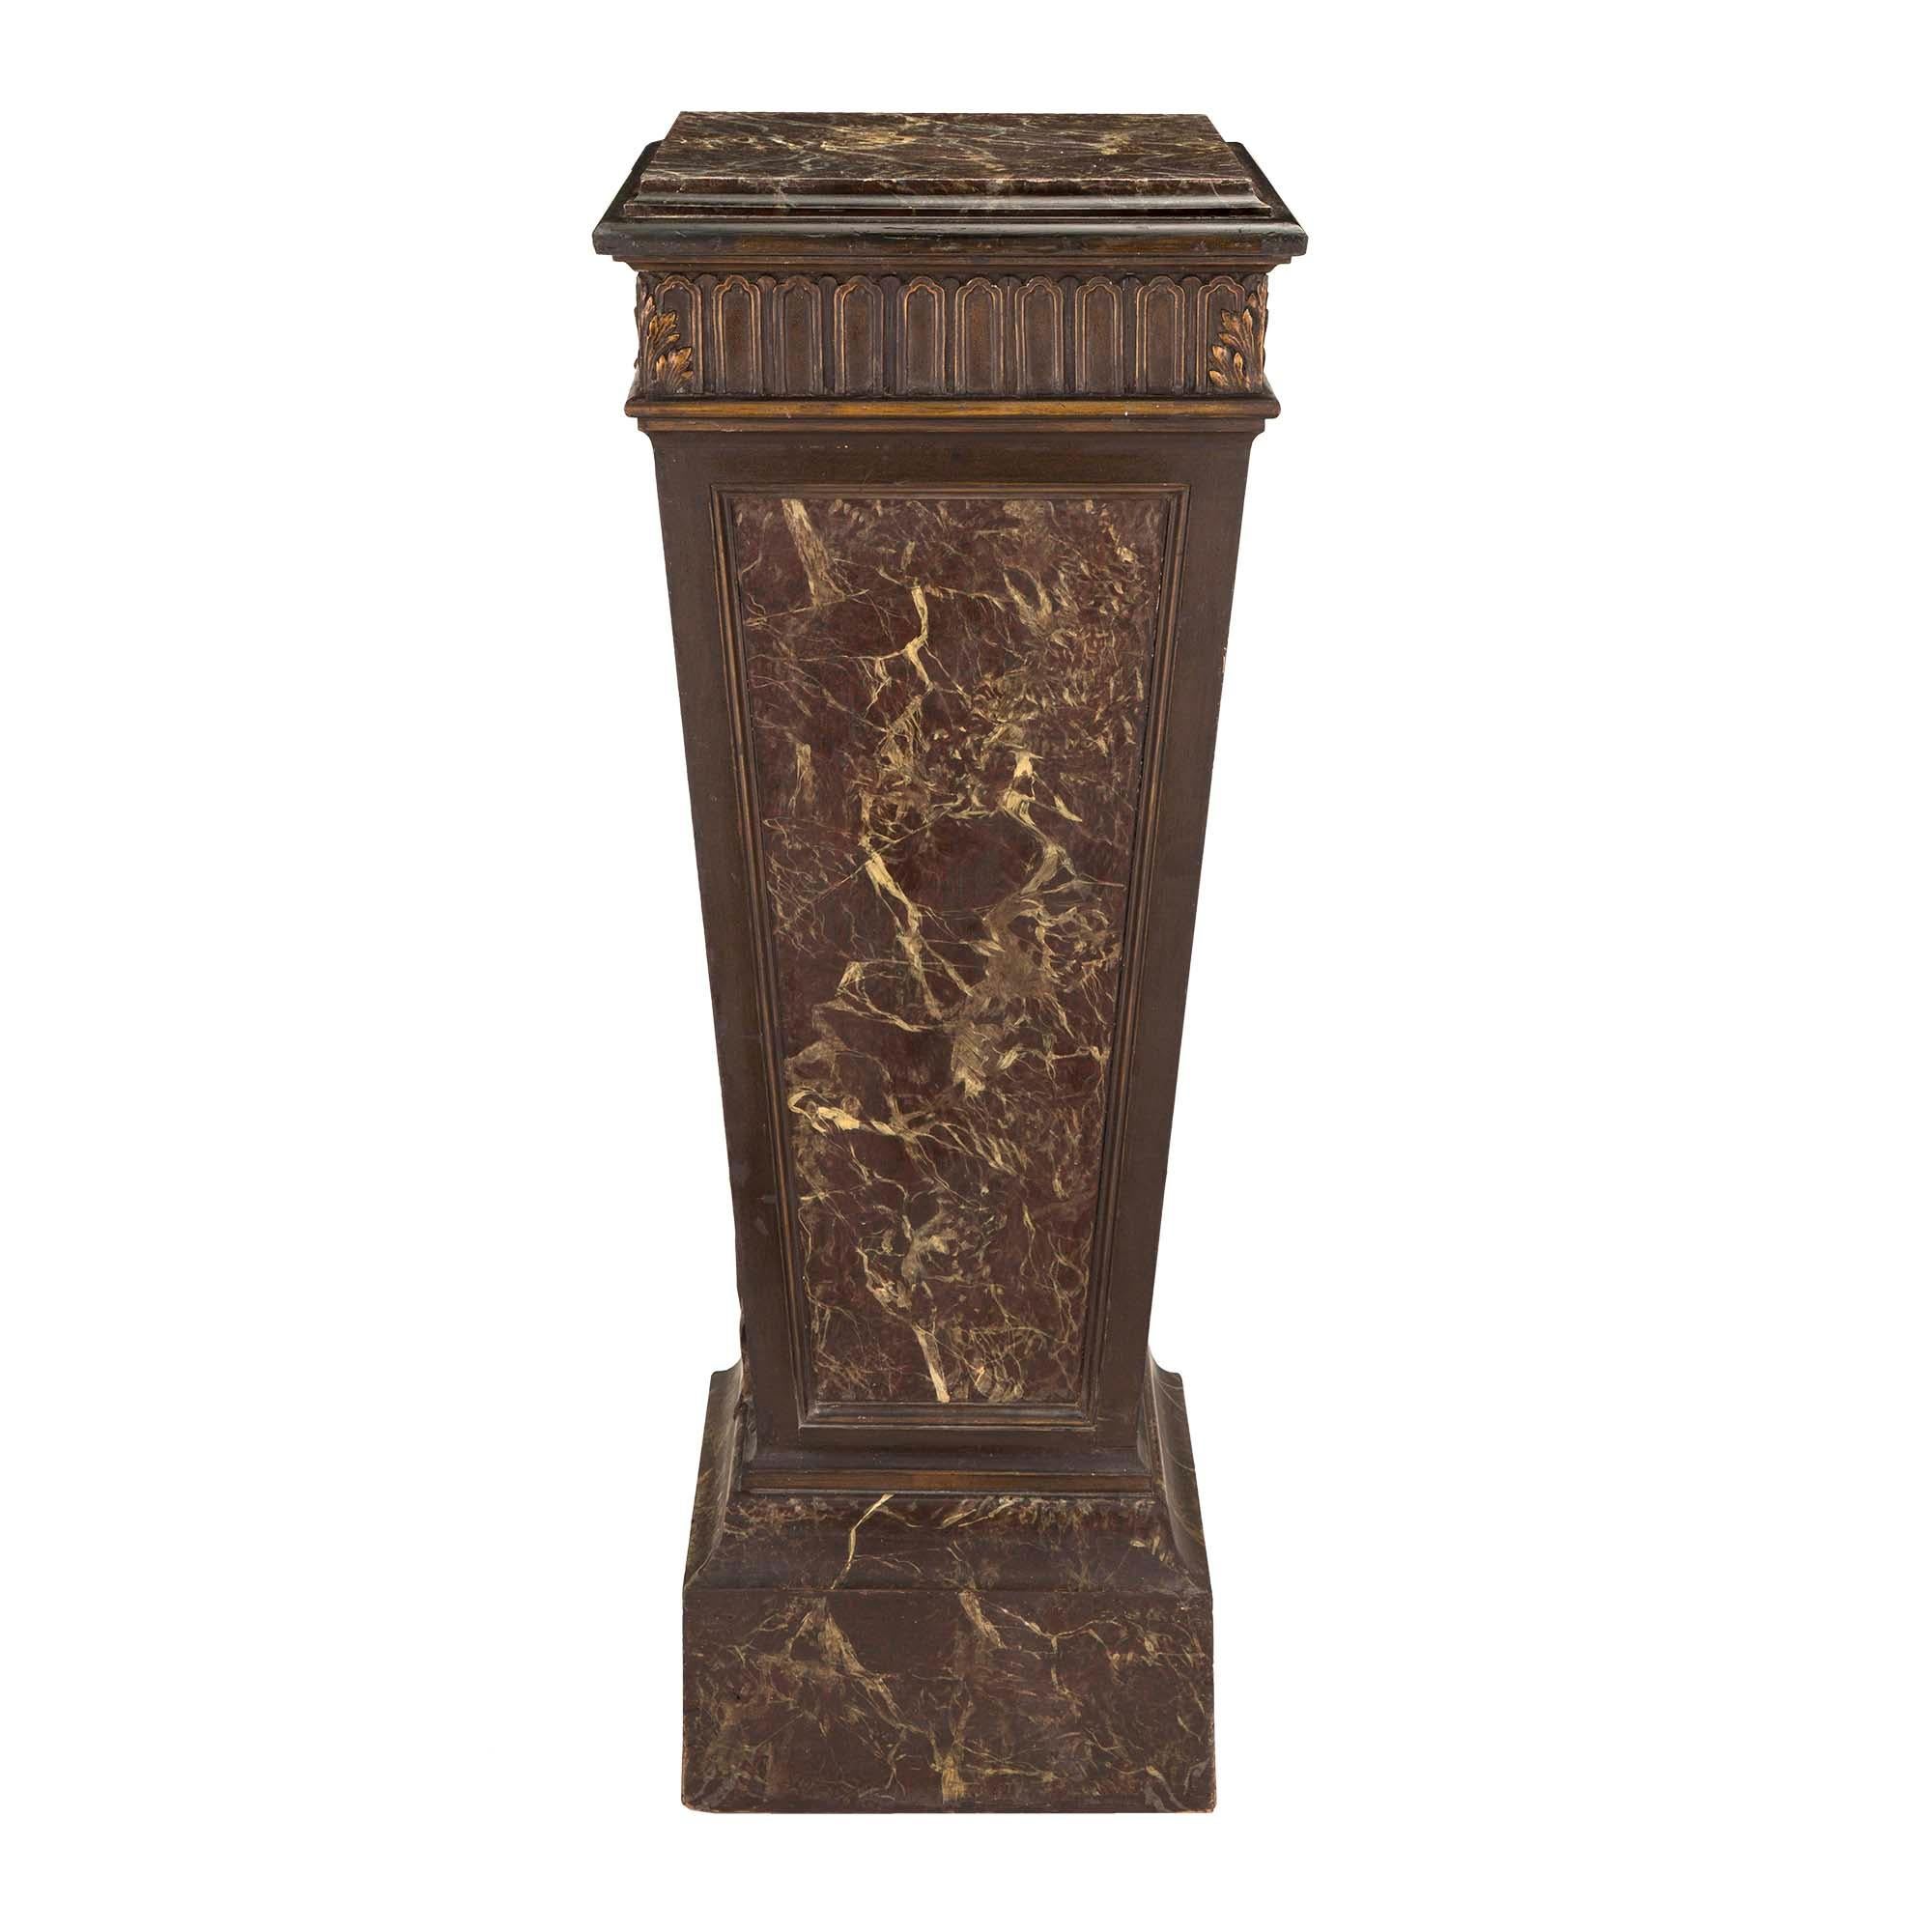 French 19th Century Louis XVI Style Faux Marble and Patinated Pedestal In Good Condition For Sale In West Palm Beach, FL